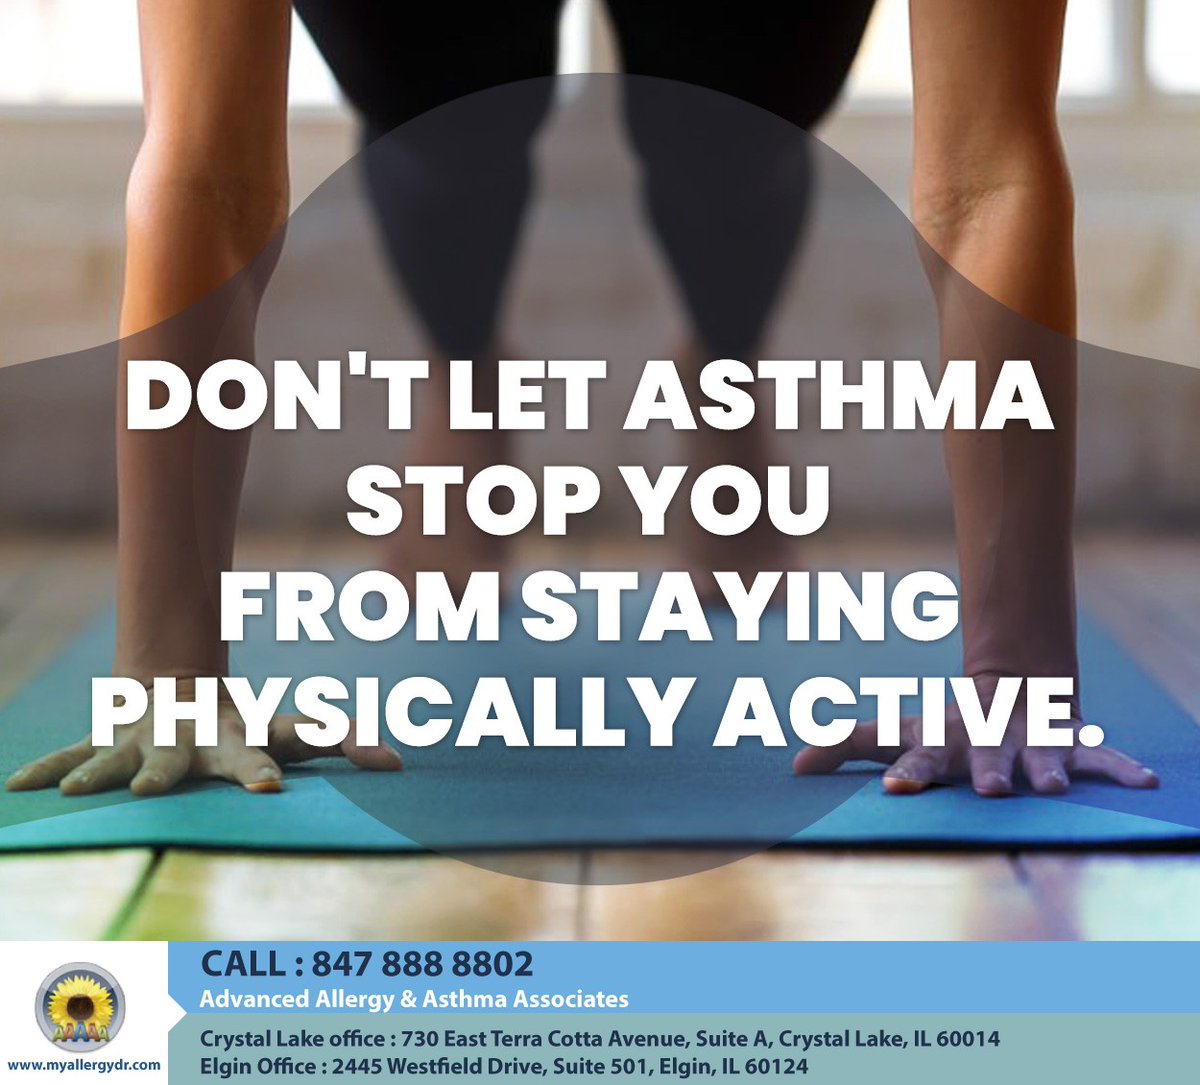 You can maintain a strong and healthy body and improve your chances of preventing diseases with exercise. At Advanced Allergy and Asthma Associates, we treat asthma conditions that limit your physical activities. Book today. #asthma #crystallake #IL #myallergydr